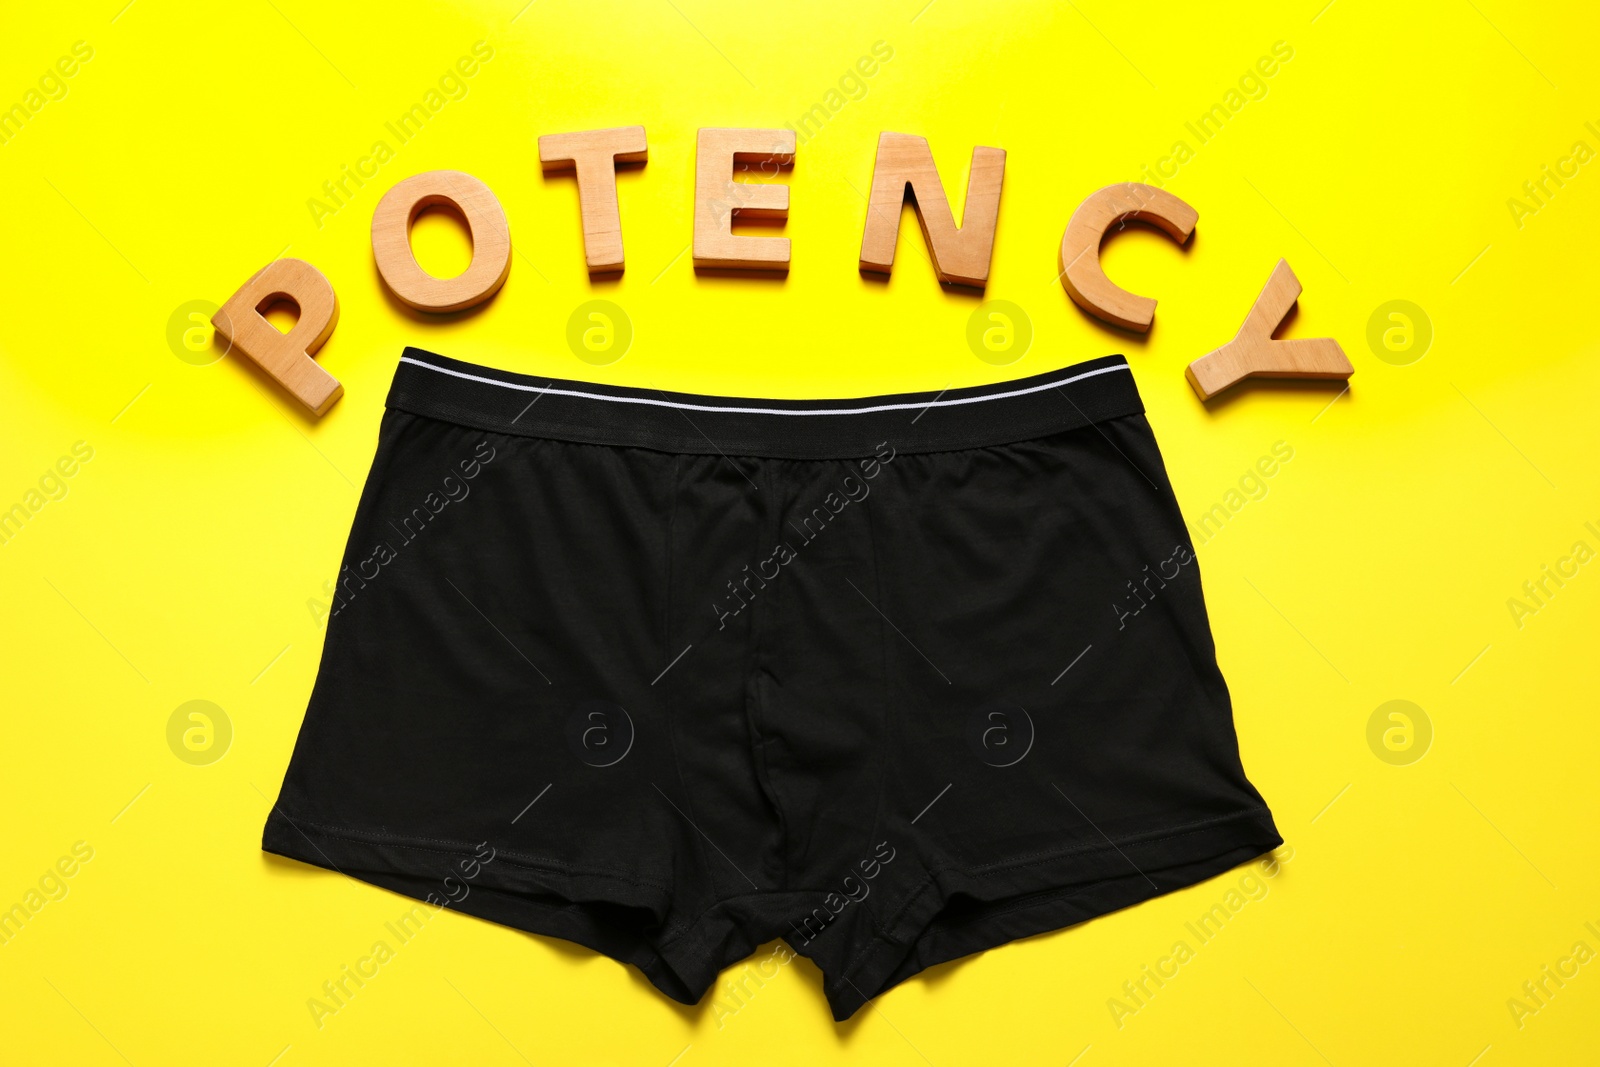 Photo of Men underwear and word Potency made of wooden letters on yellow background, flat lay